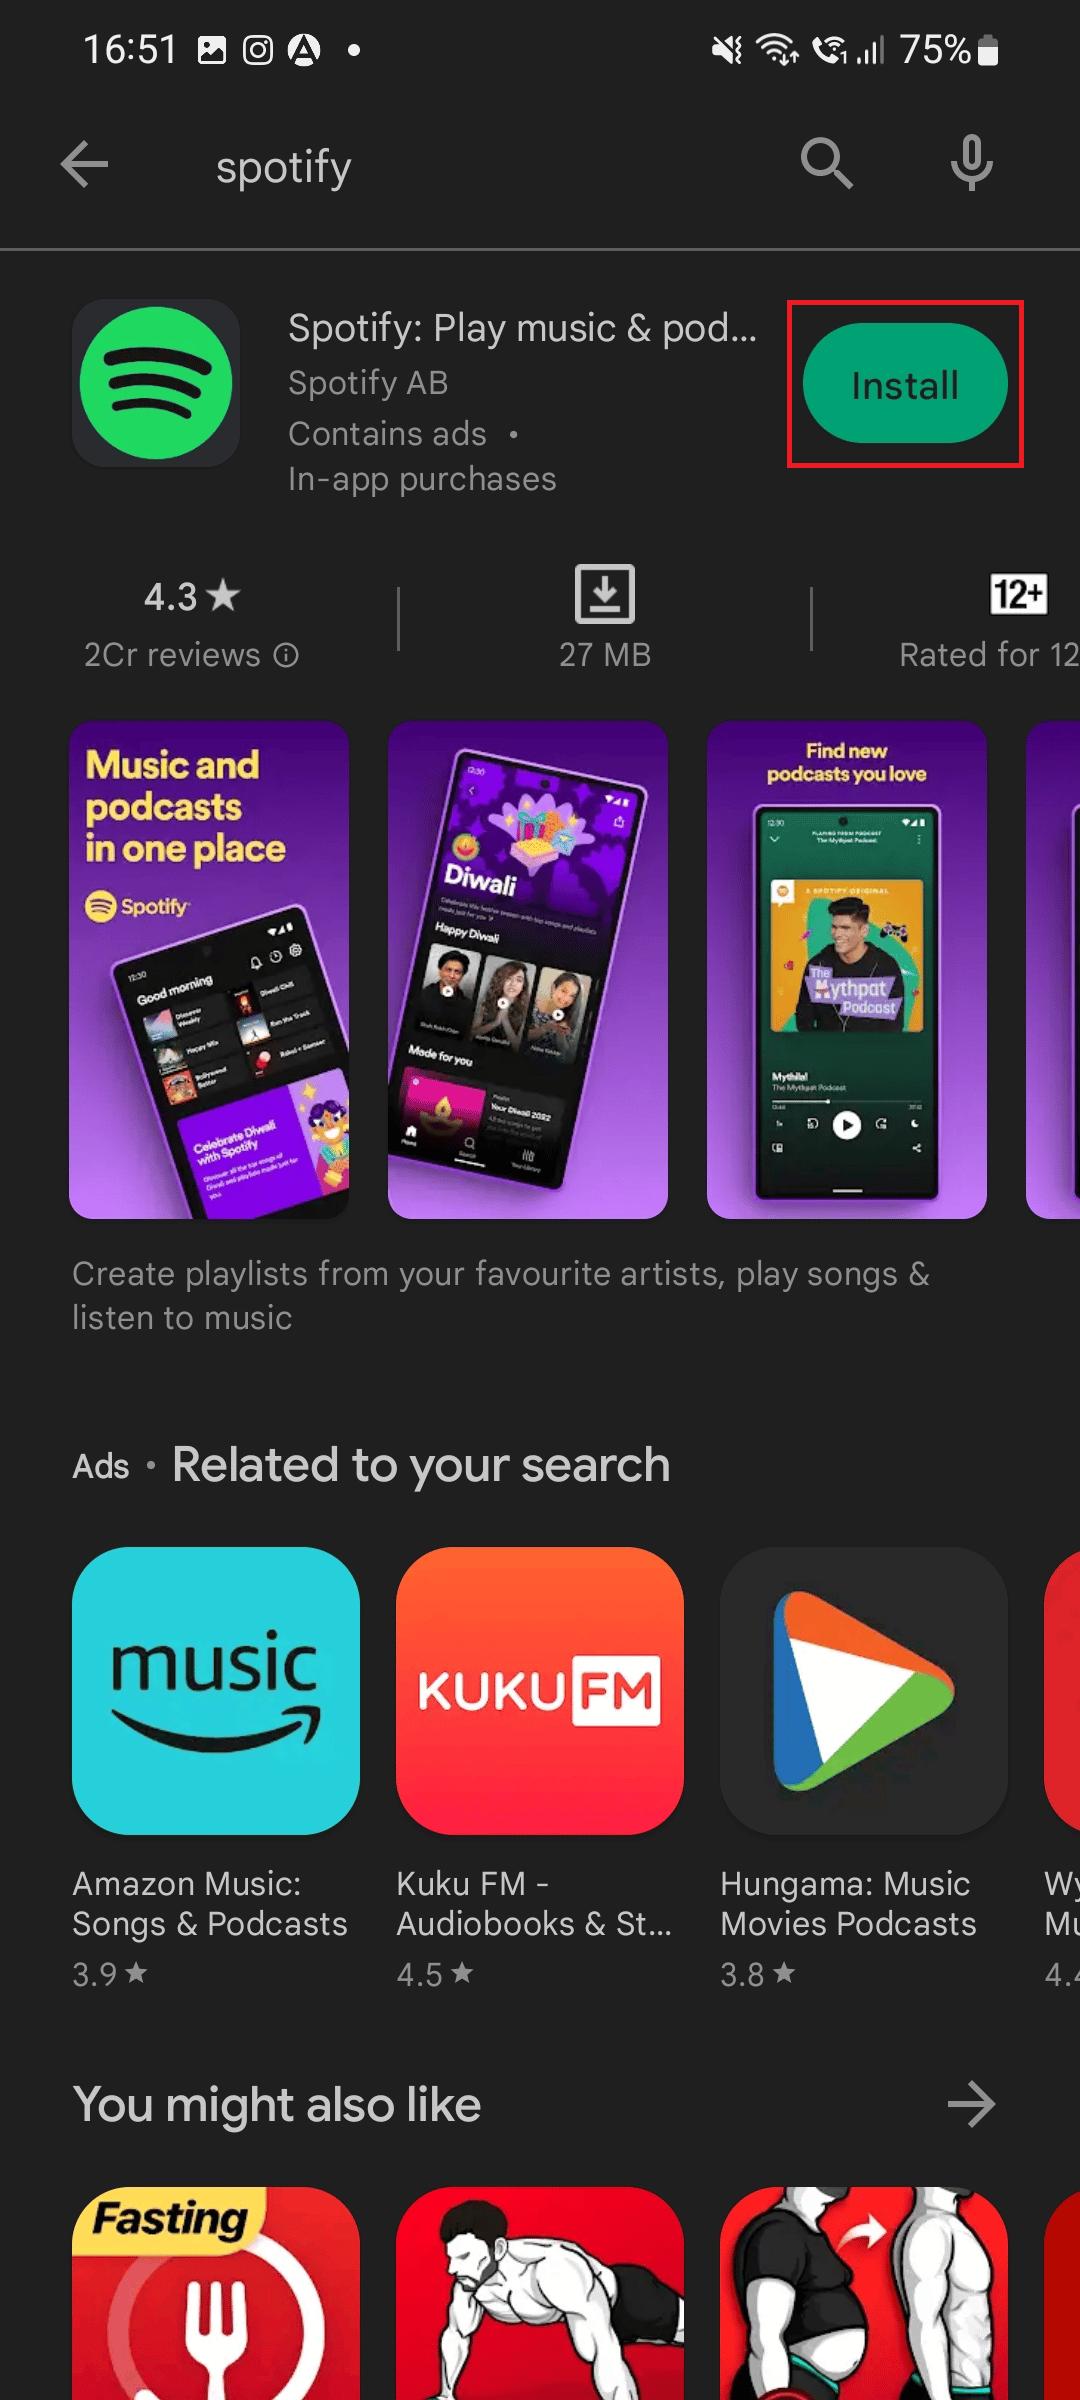 INSTALL OPTION SHOWN FOR SPOTIFY APP ON ANDROID. 